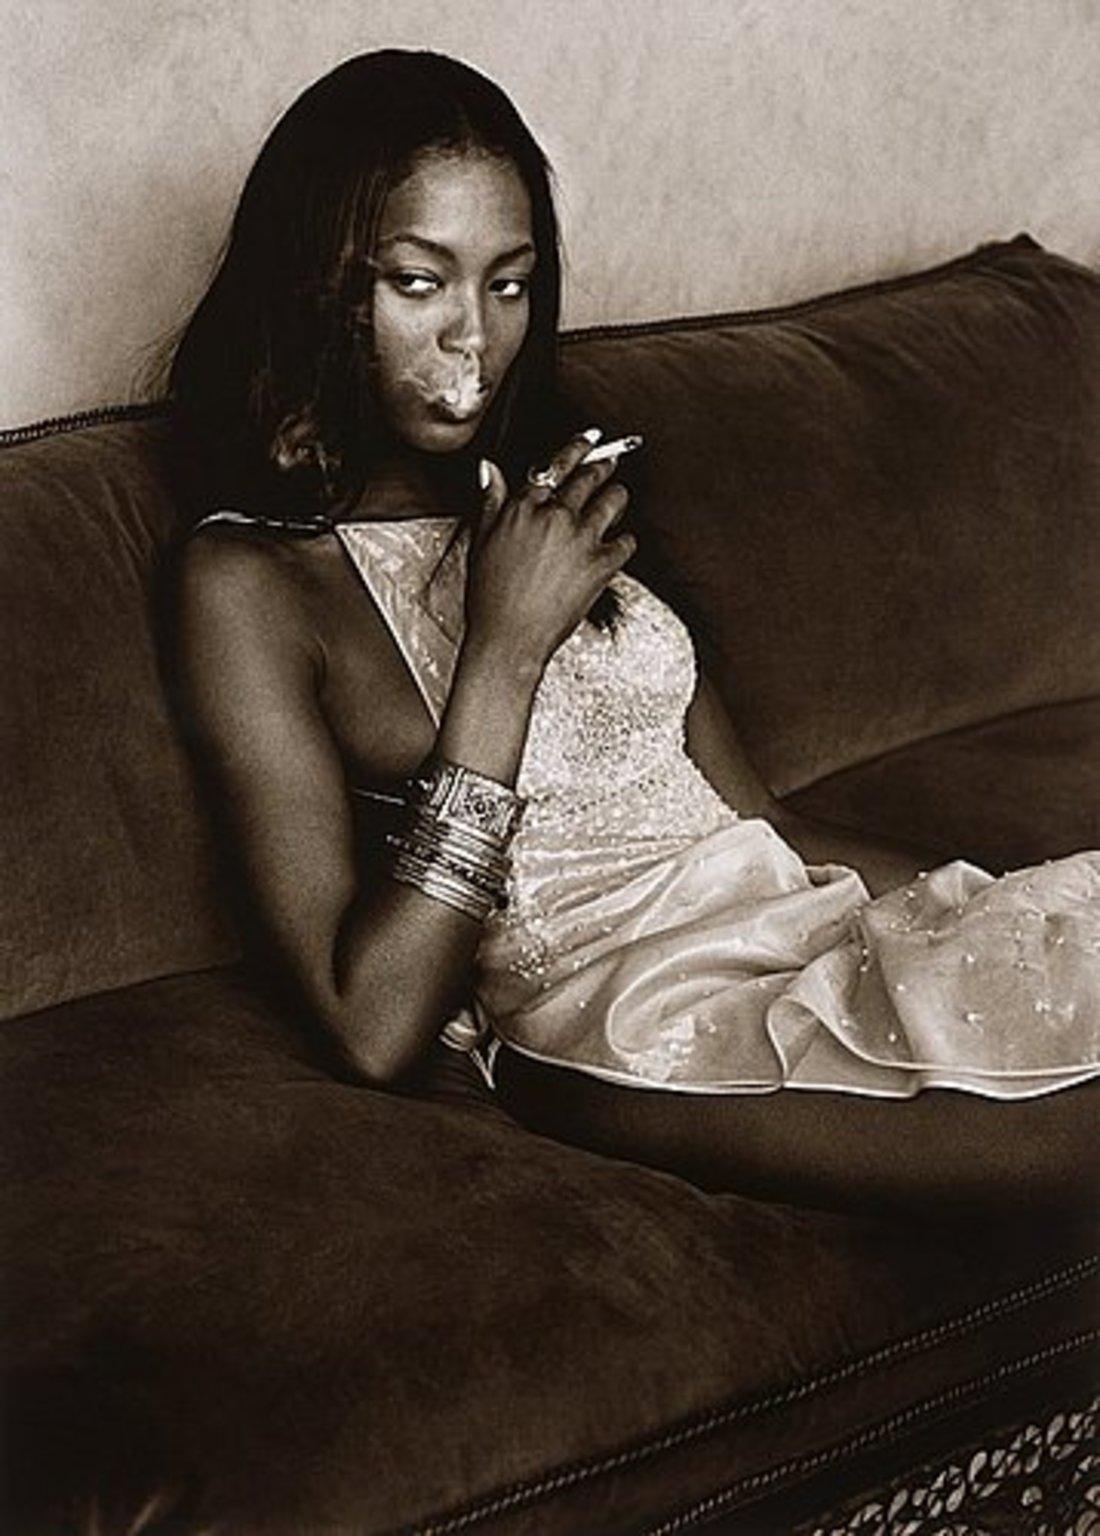 Albert Watson Portrait Photograph - Naomi Campbell - the supermodel smoking while sitting on a sofa